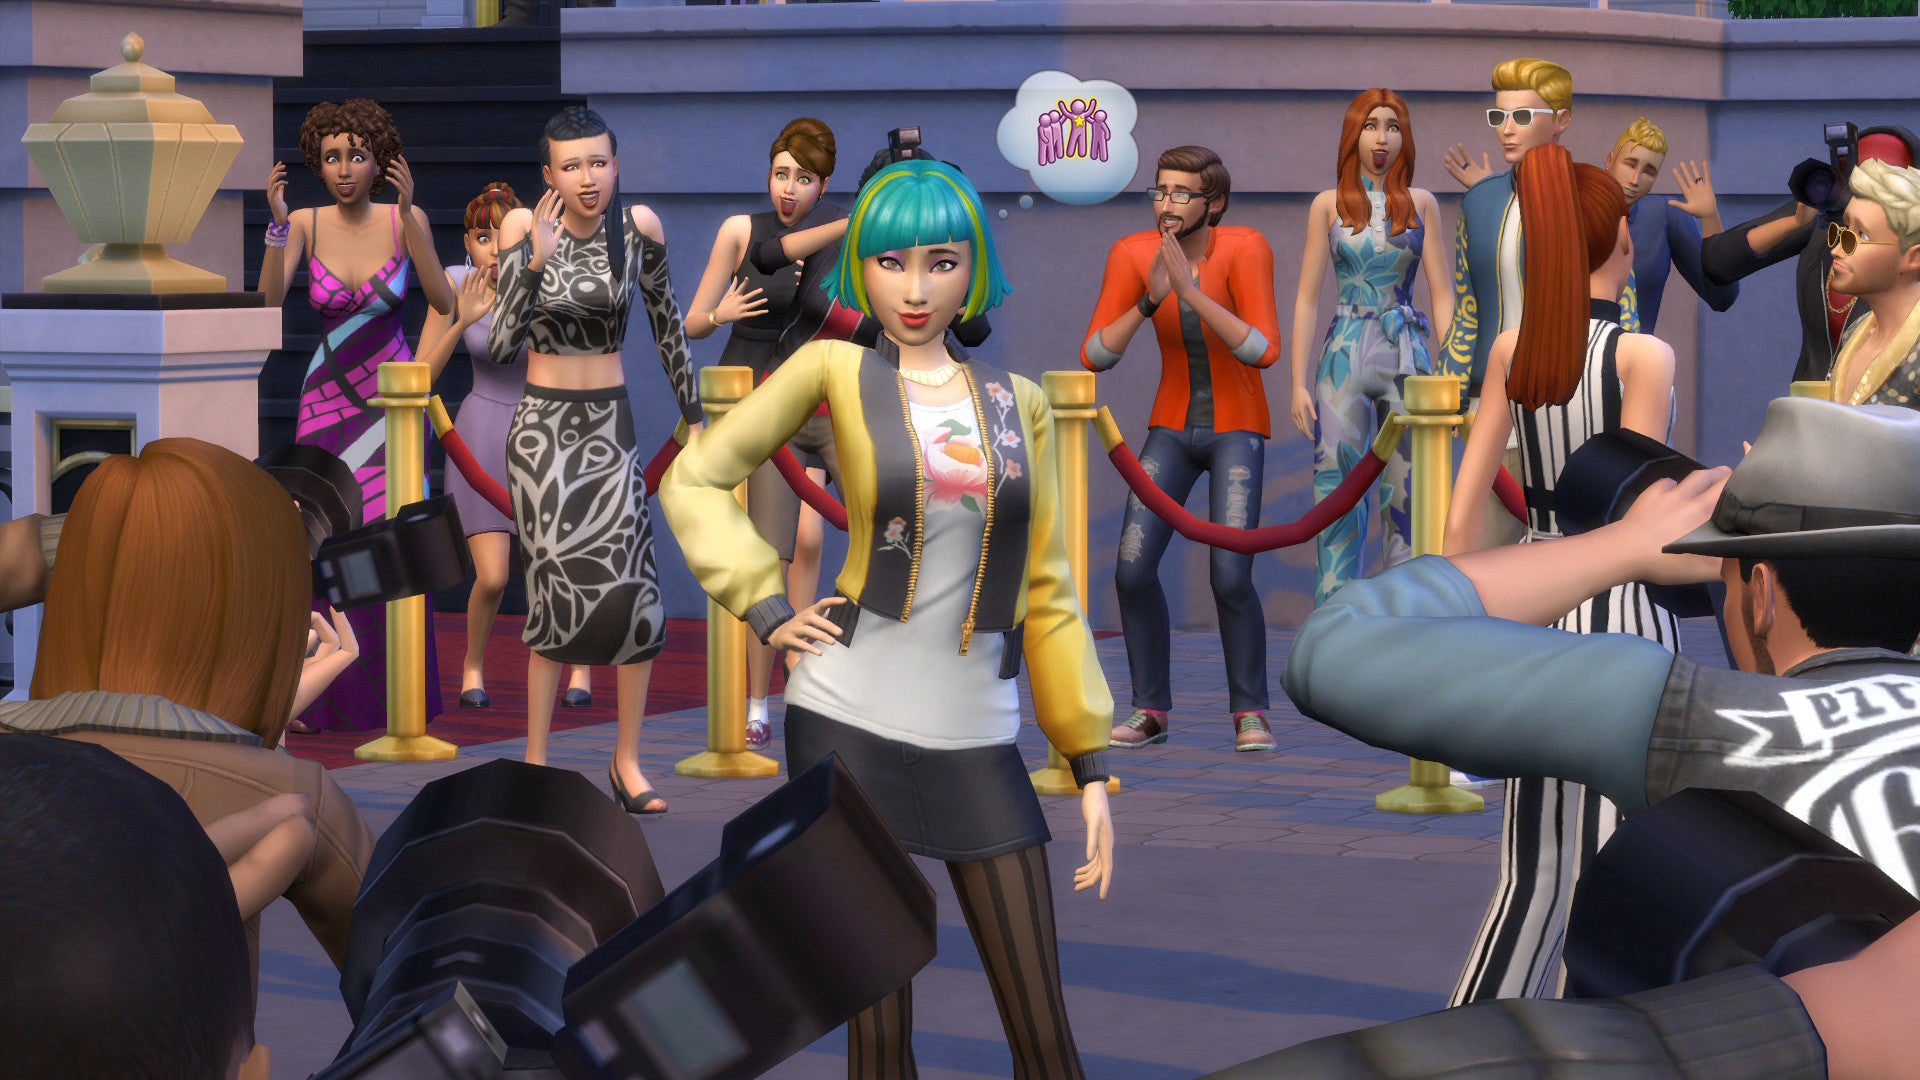 The Sims 4 - Get Famous DLC